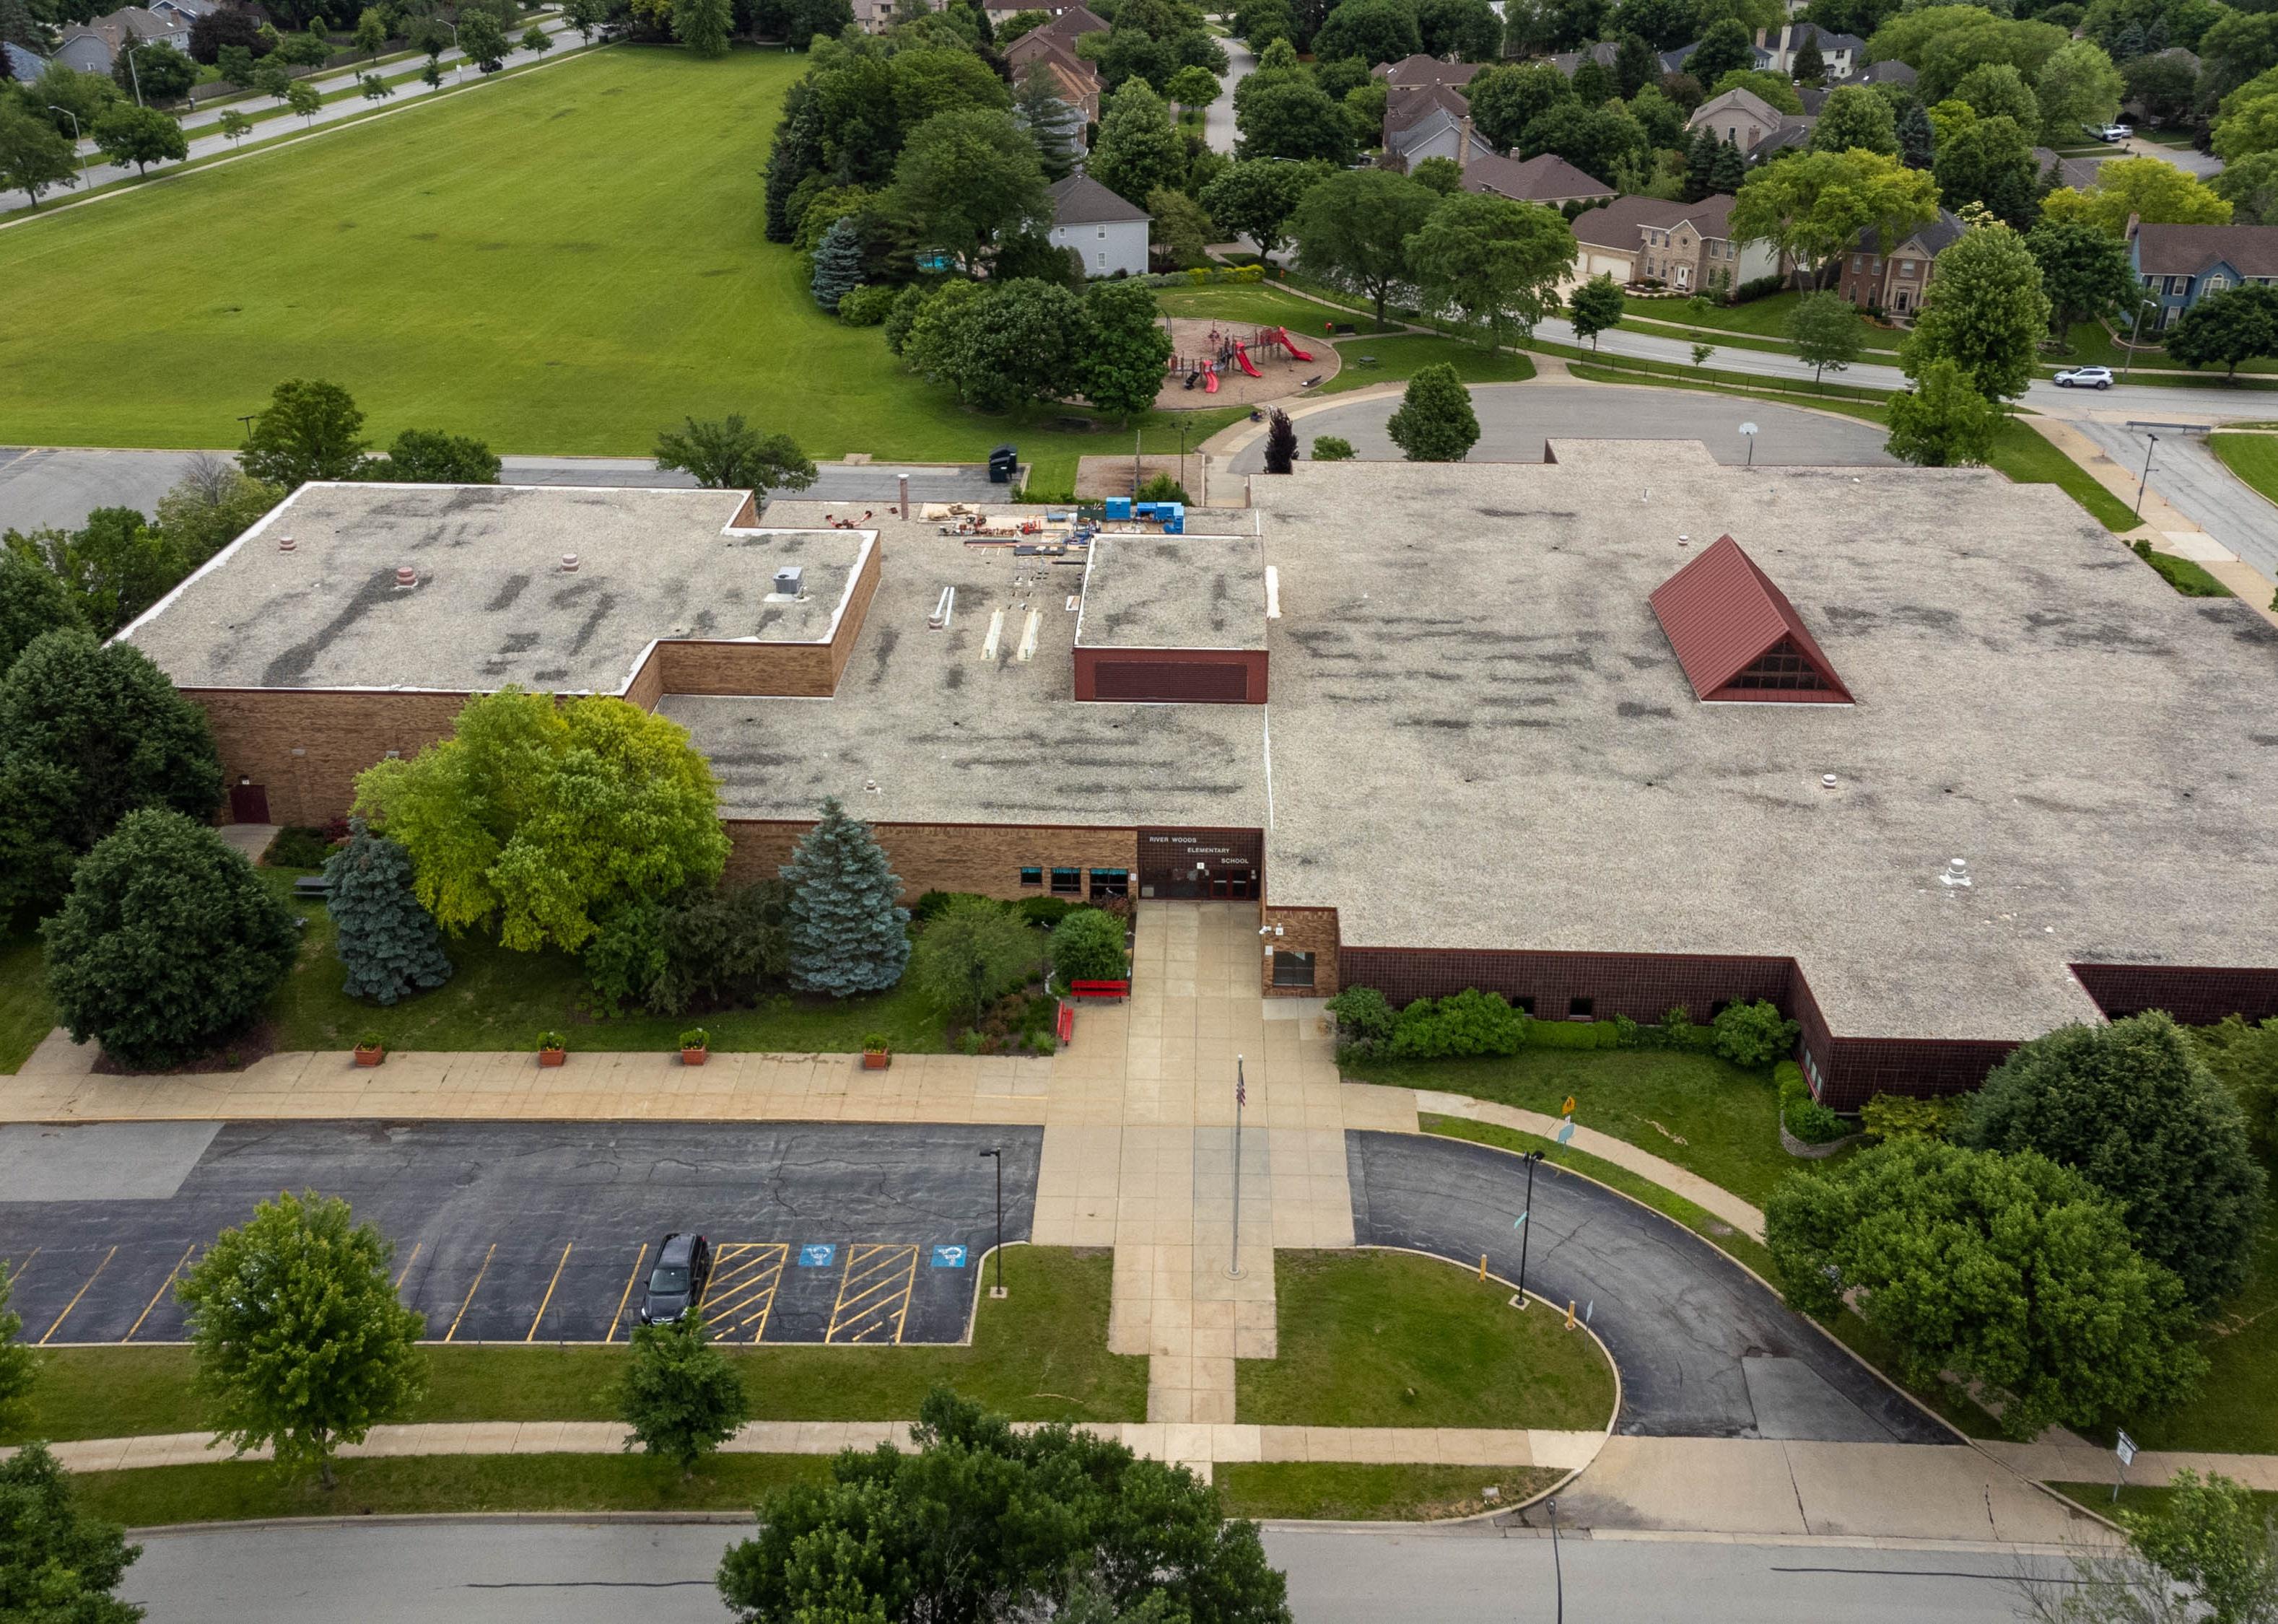 View of elementary school in Naperville, Illinois.